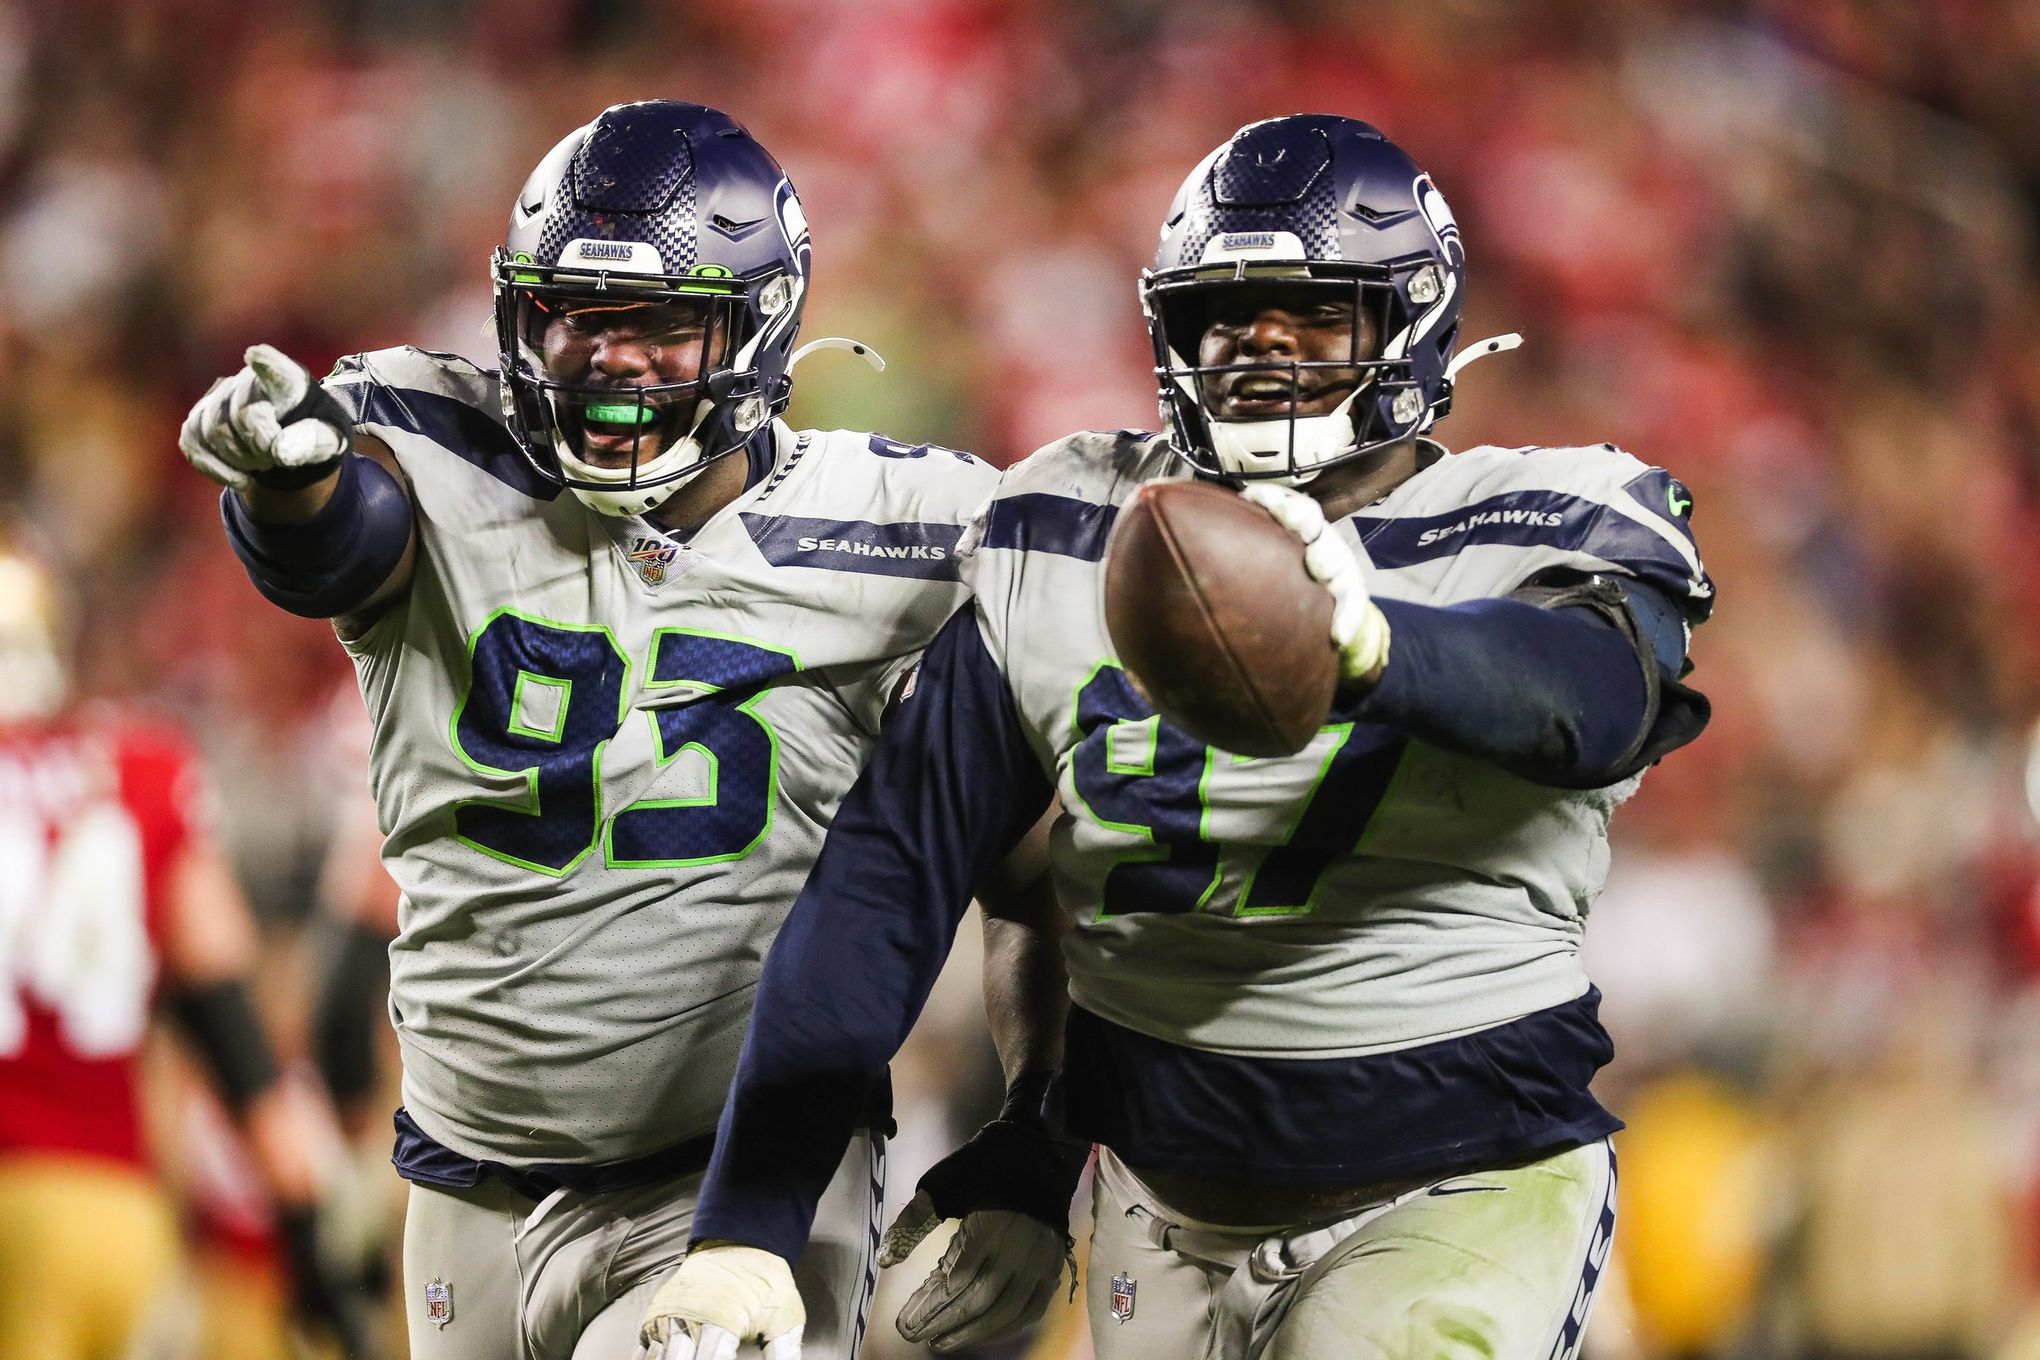 For some Seahawks, playing on Monday Night Football is 'just